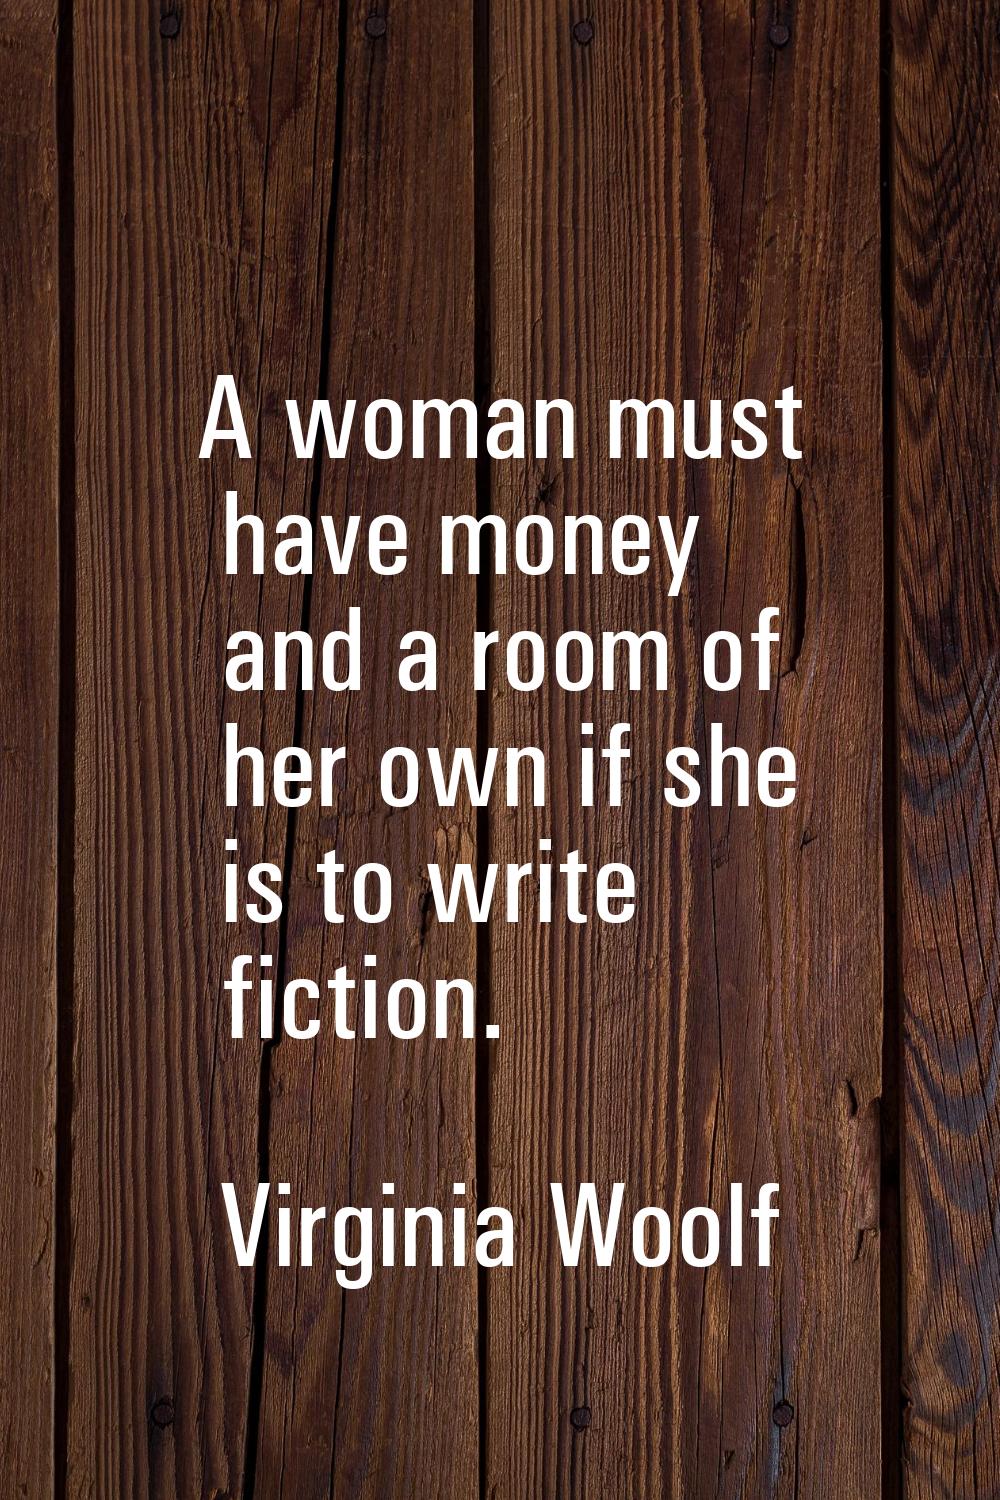 A woman must have money and a room of her own if she is to write fiction.